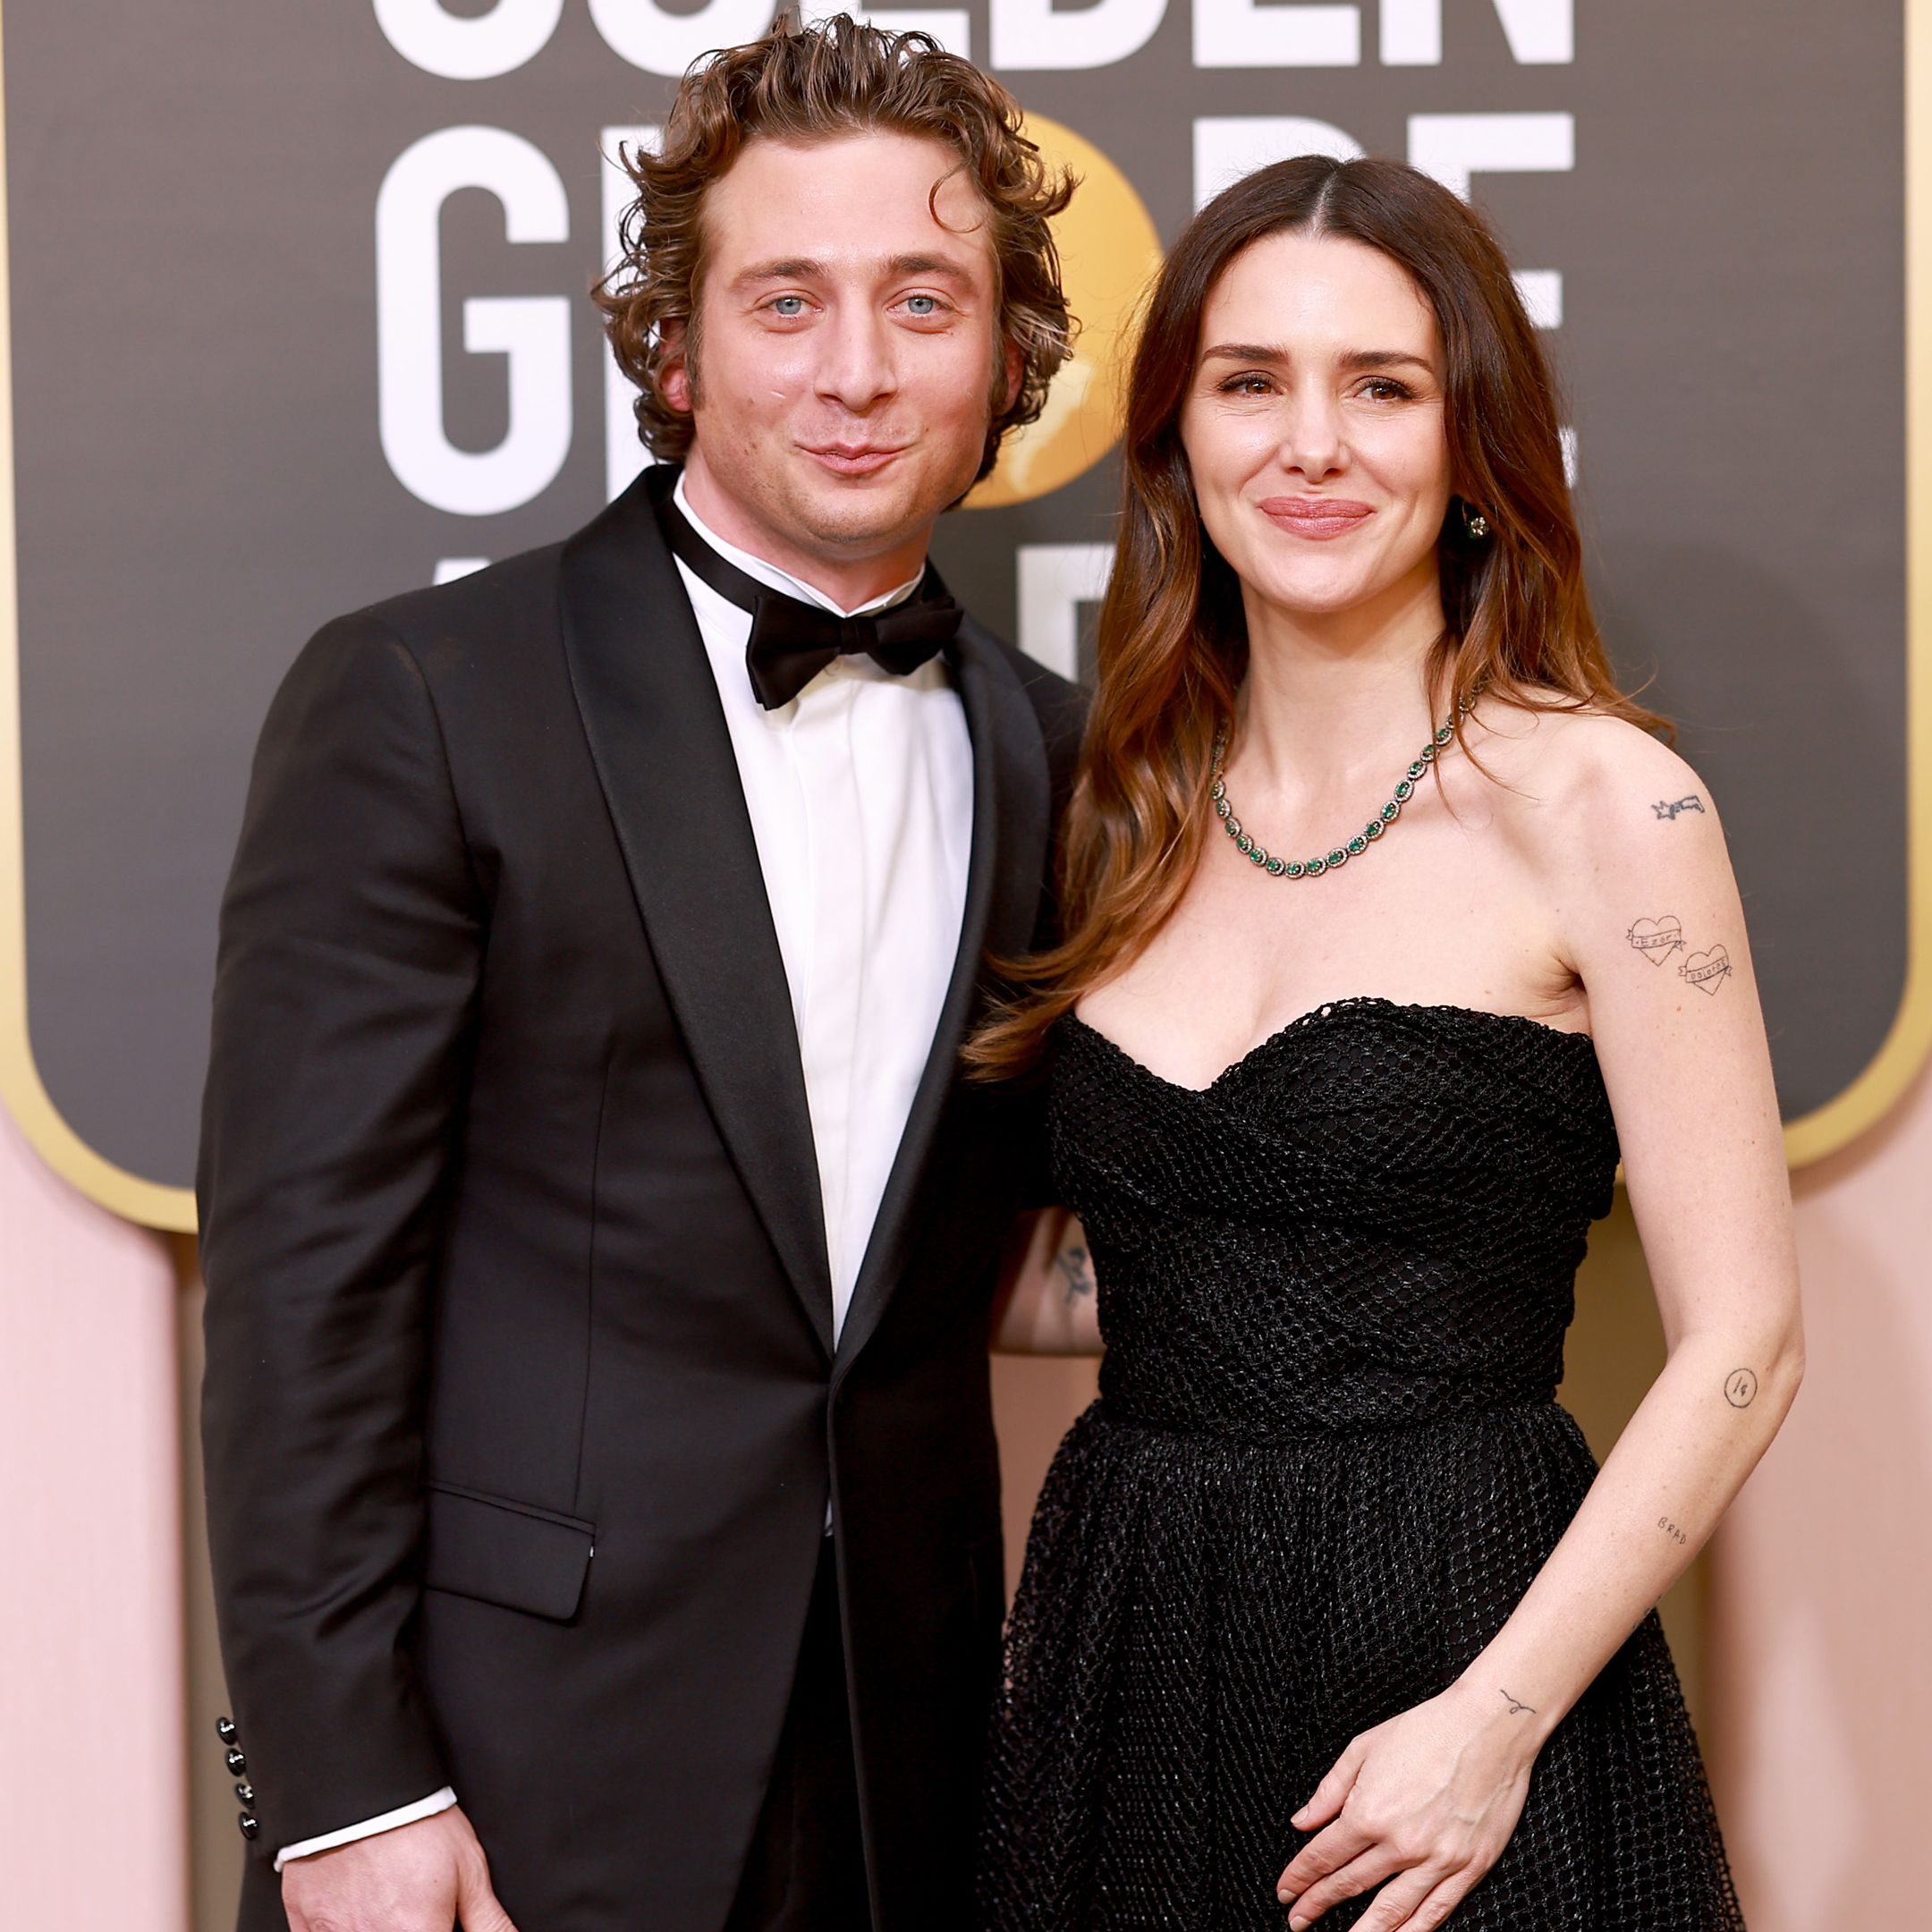 All About Jeremy Allen White and His Wife Addison Timlin